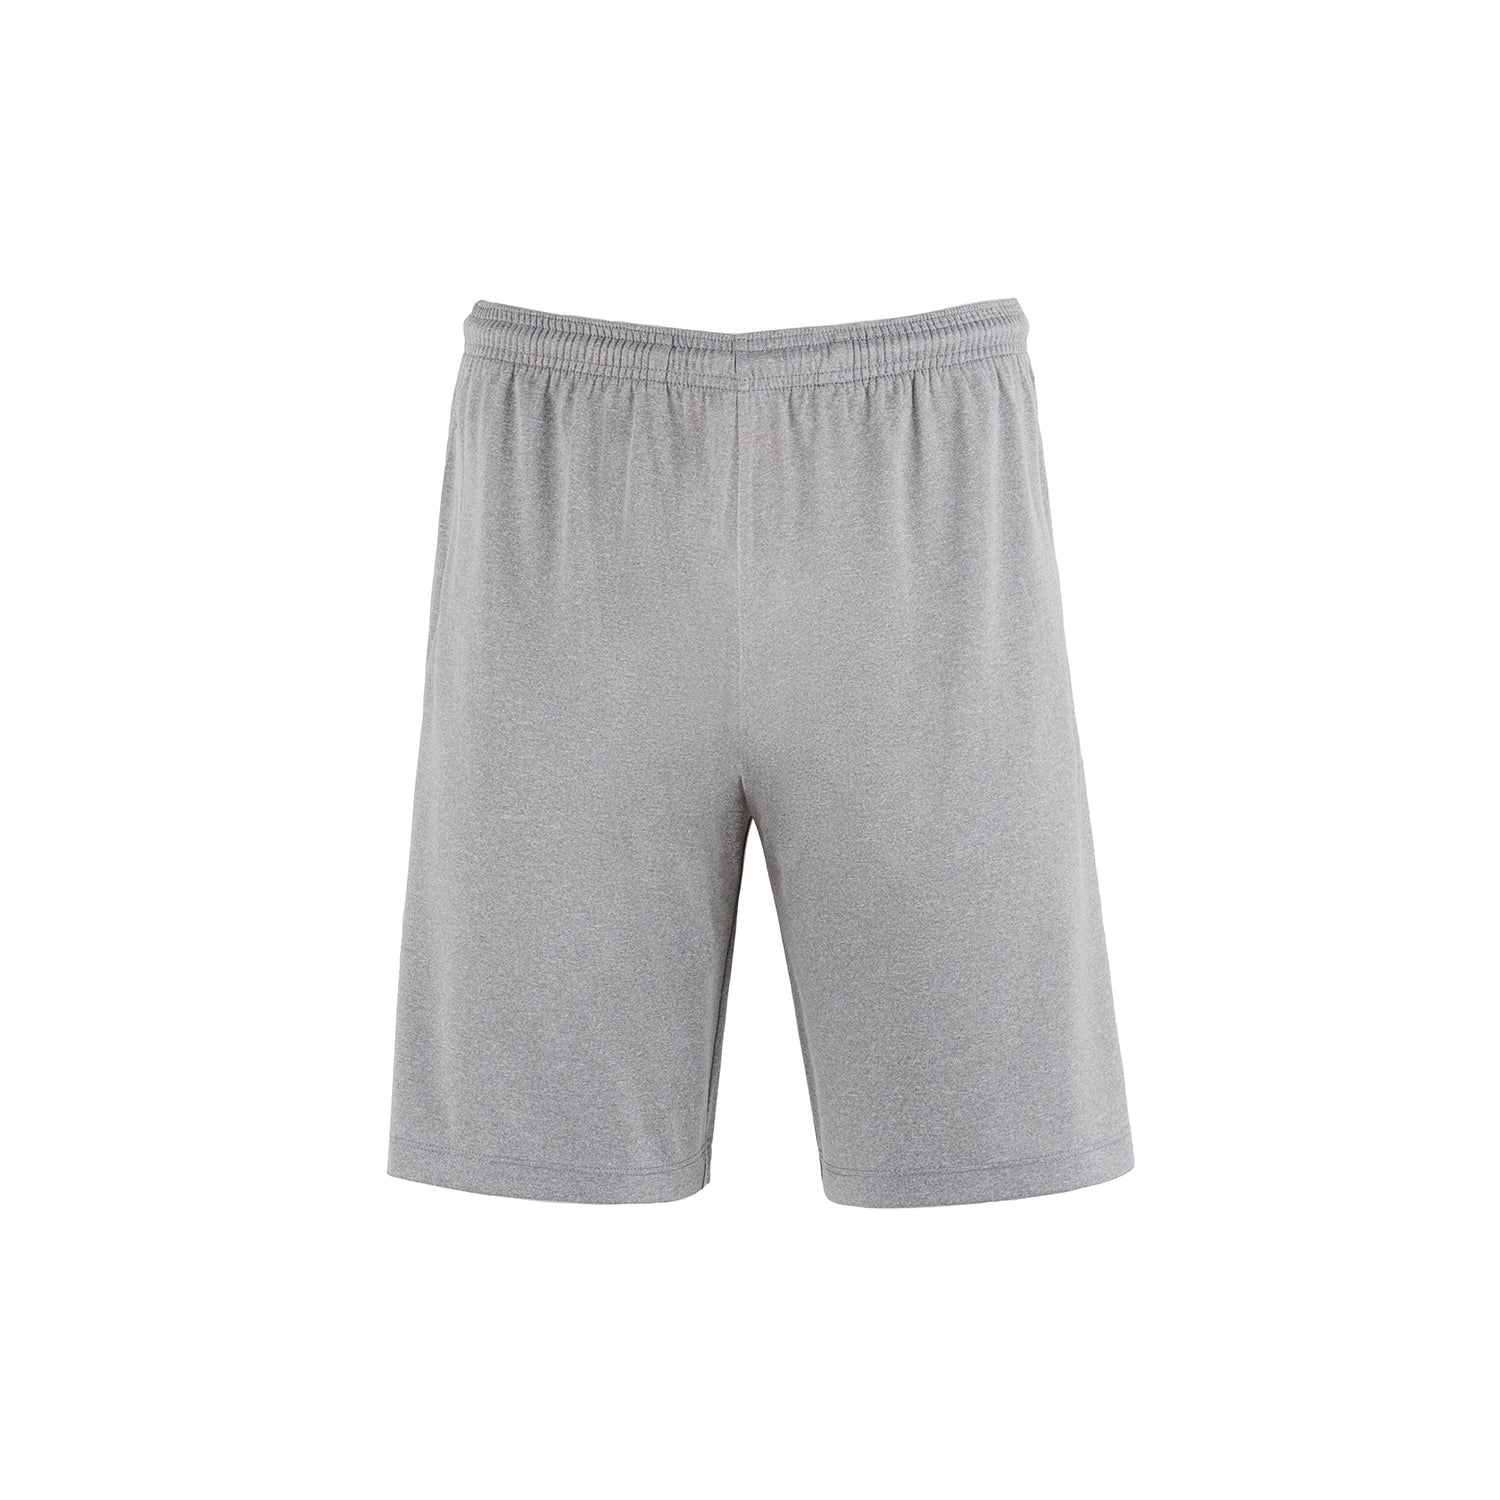 P04475 - Wave Athletic Short with Pockets Grey Heather / XS